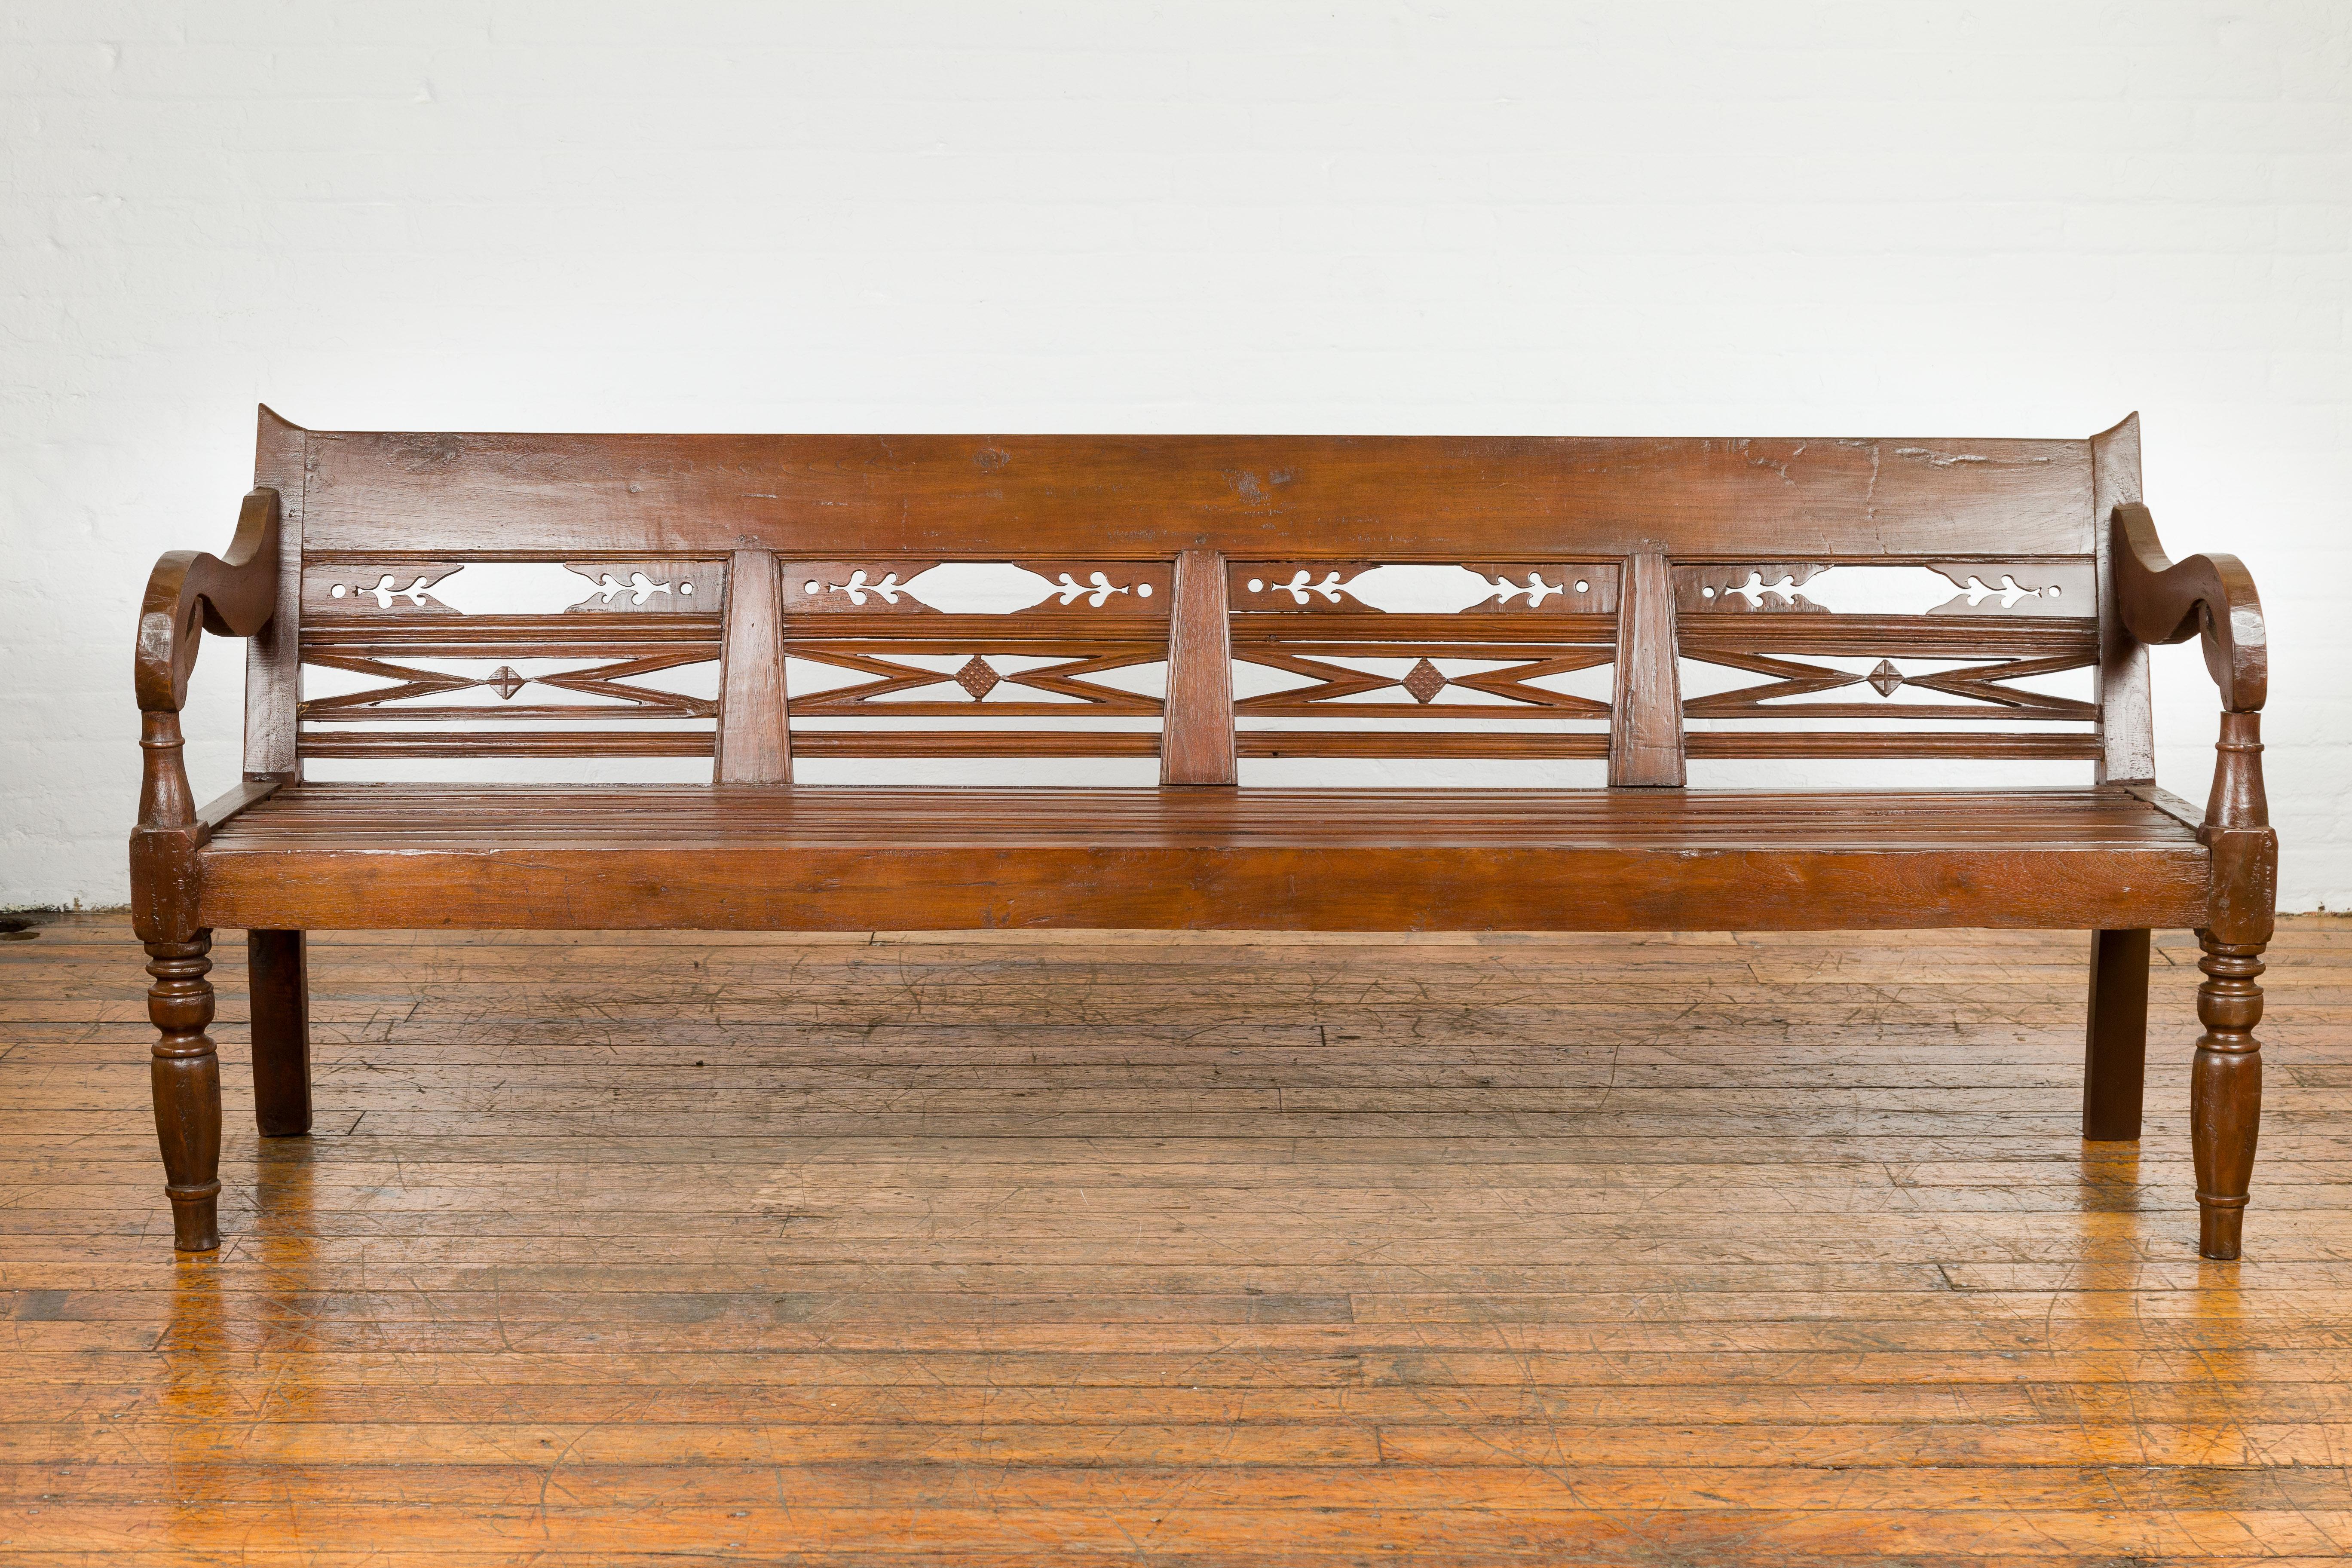 A Dutch Colonial wooden bench from the early 20th century, with carved back, scrolling arms and turned baluster legs. This early 20th-century Dutch Colonial wooden bench is a testament to exquisite craftsmanship and timeless design, gracefully